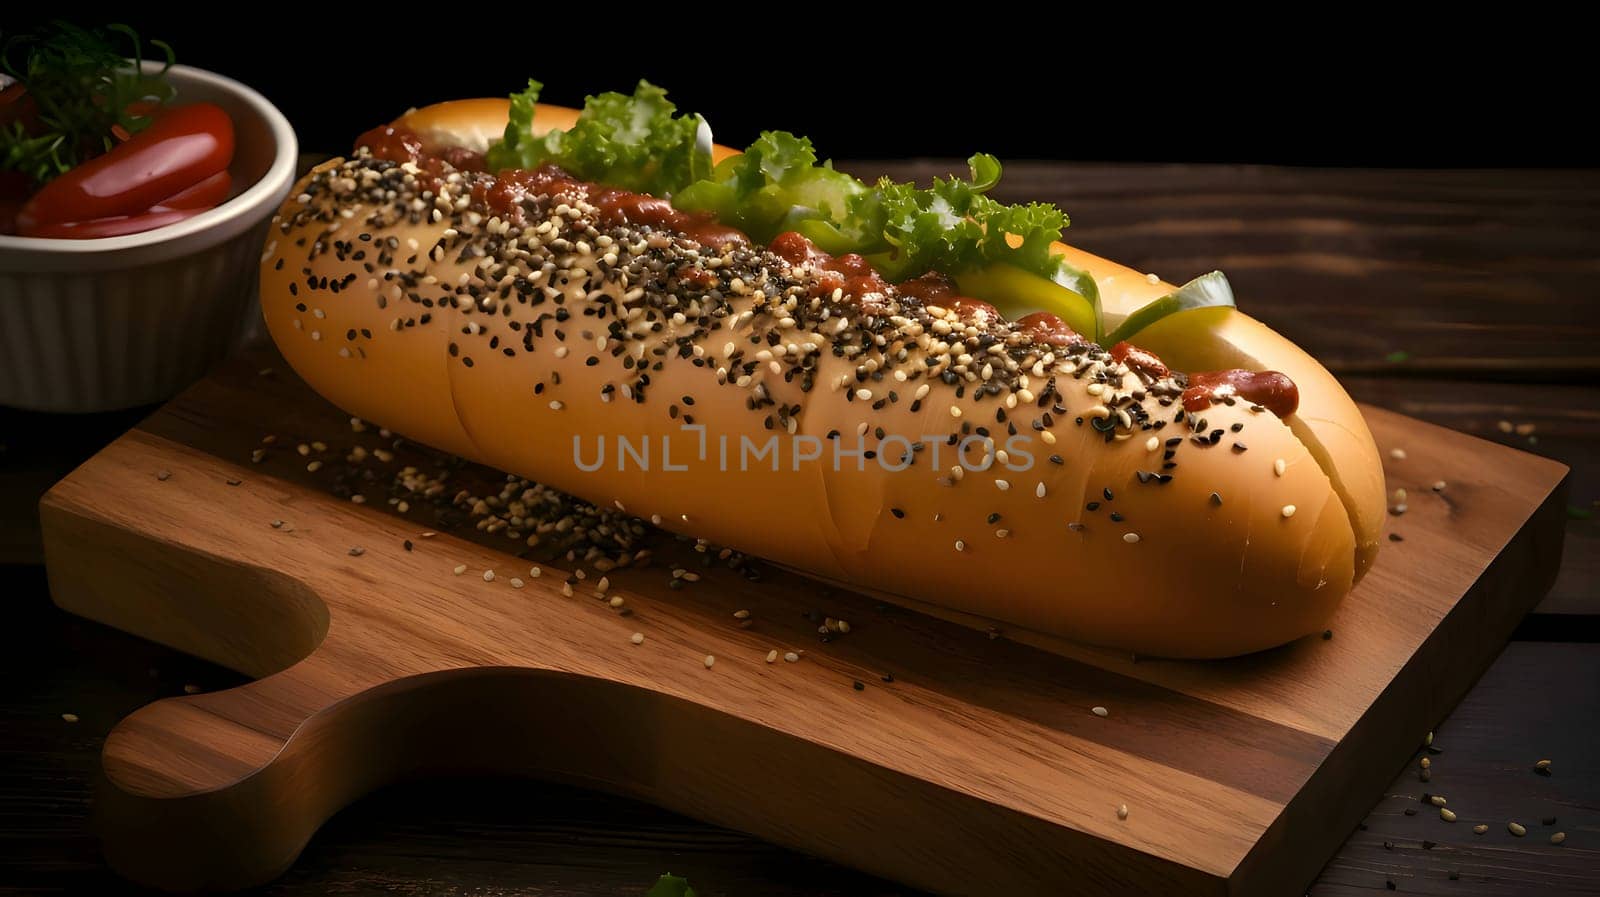 A hot dog adorned with mustard, ketchup, cucumber, and tomato is presented on a wooden kitchen board, offering a classic and appetizing snack.